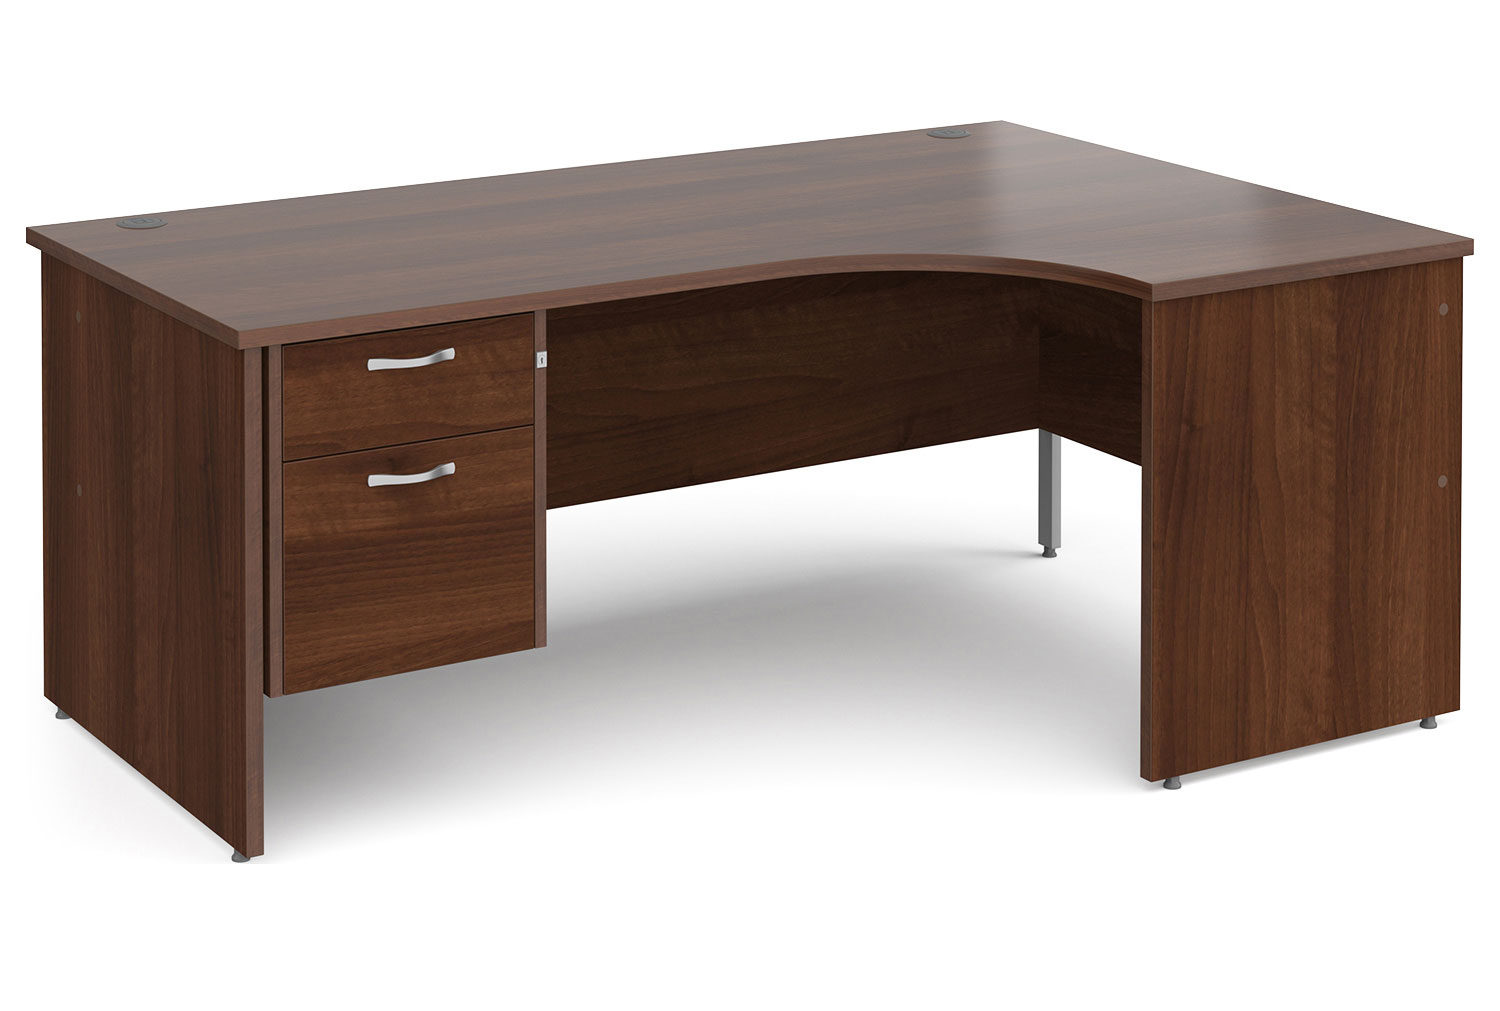 All Walnut Panel End Right Hand Ergo Office Desk 2 Drawers, 180wx120/80dx73h (cm), Fully Installed